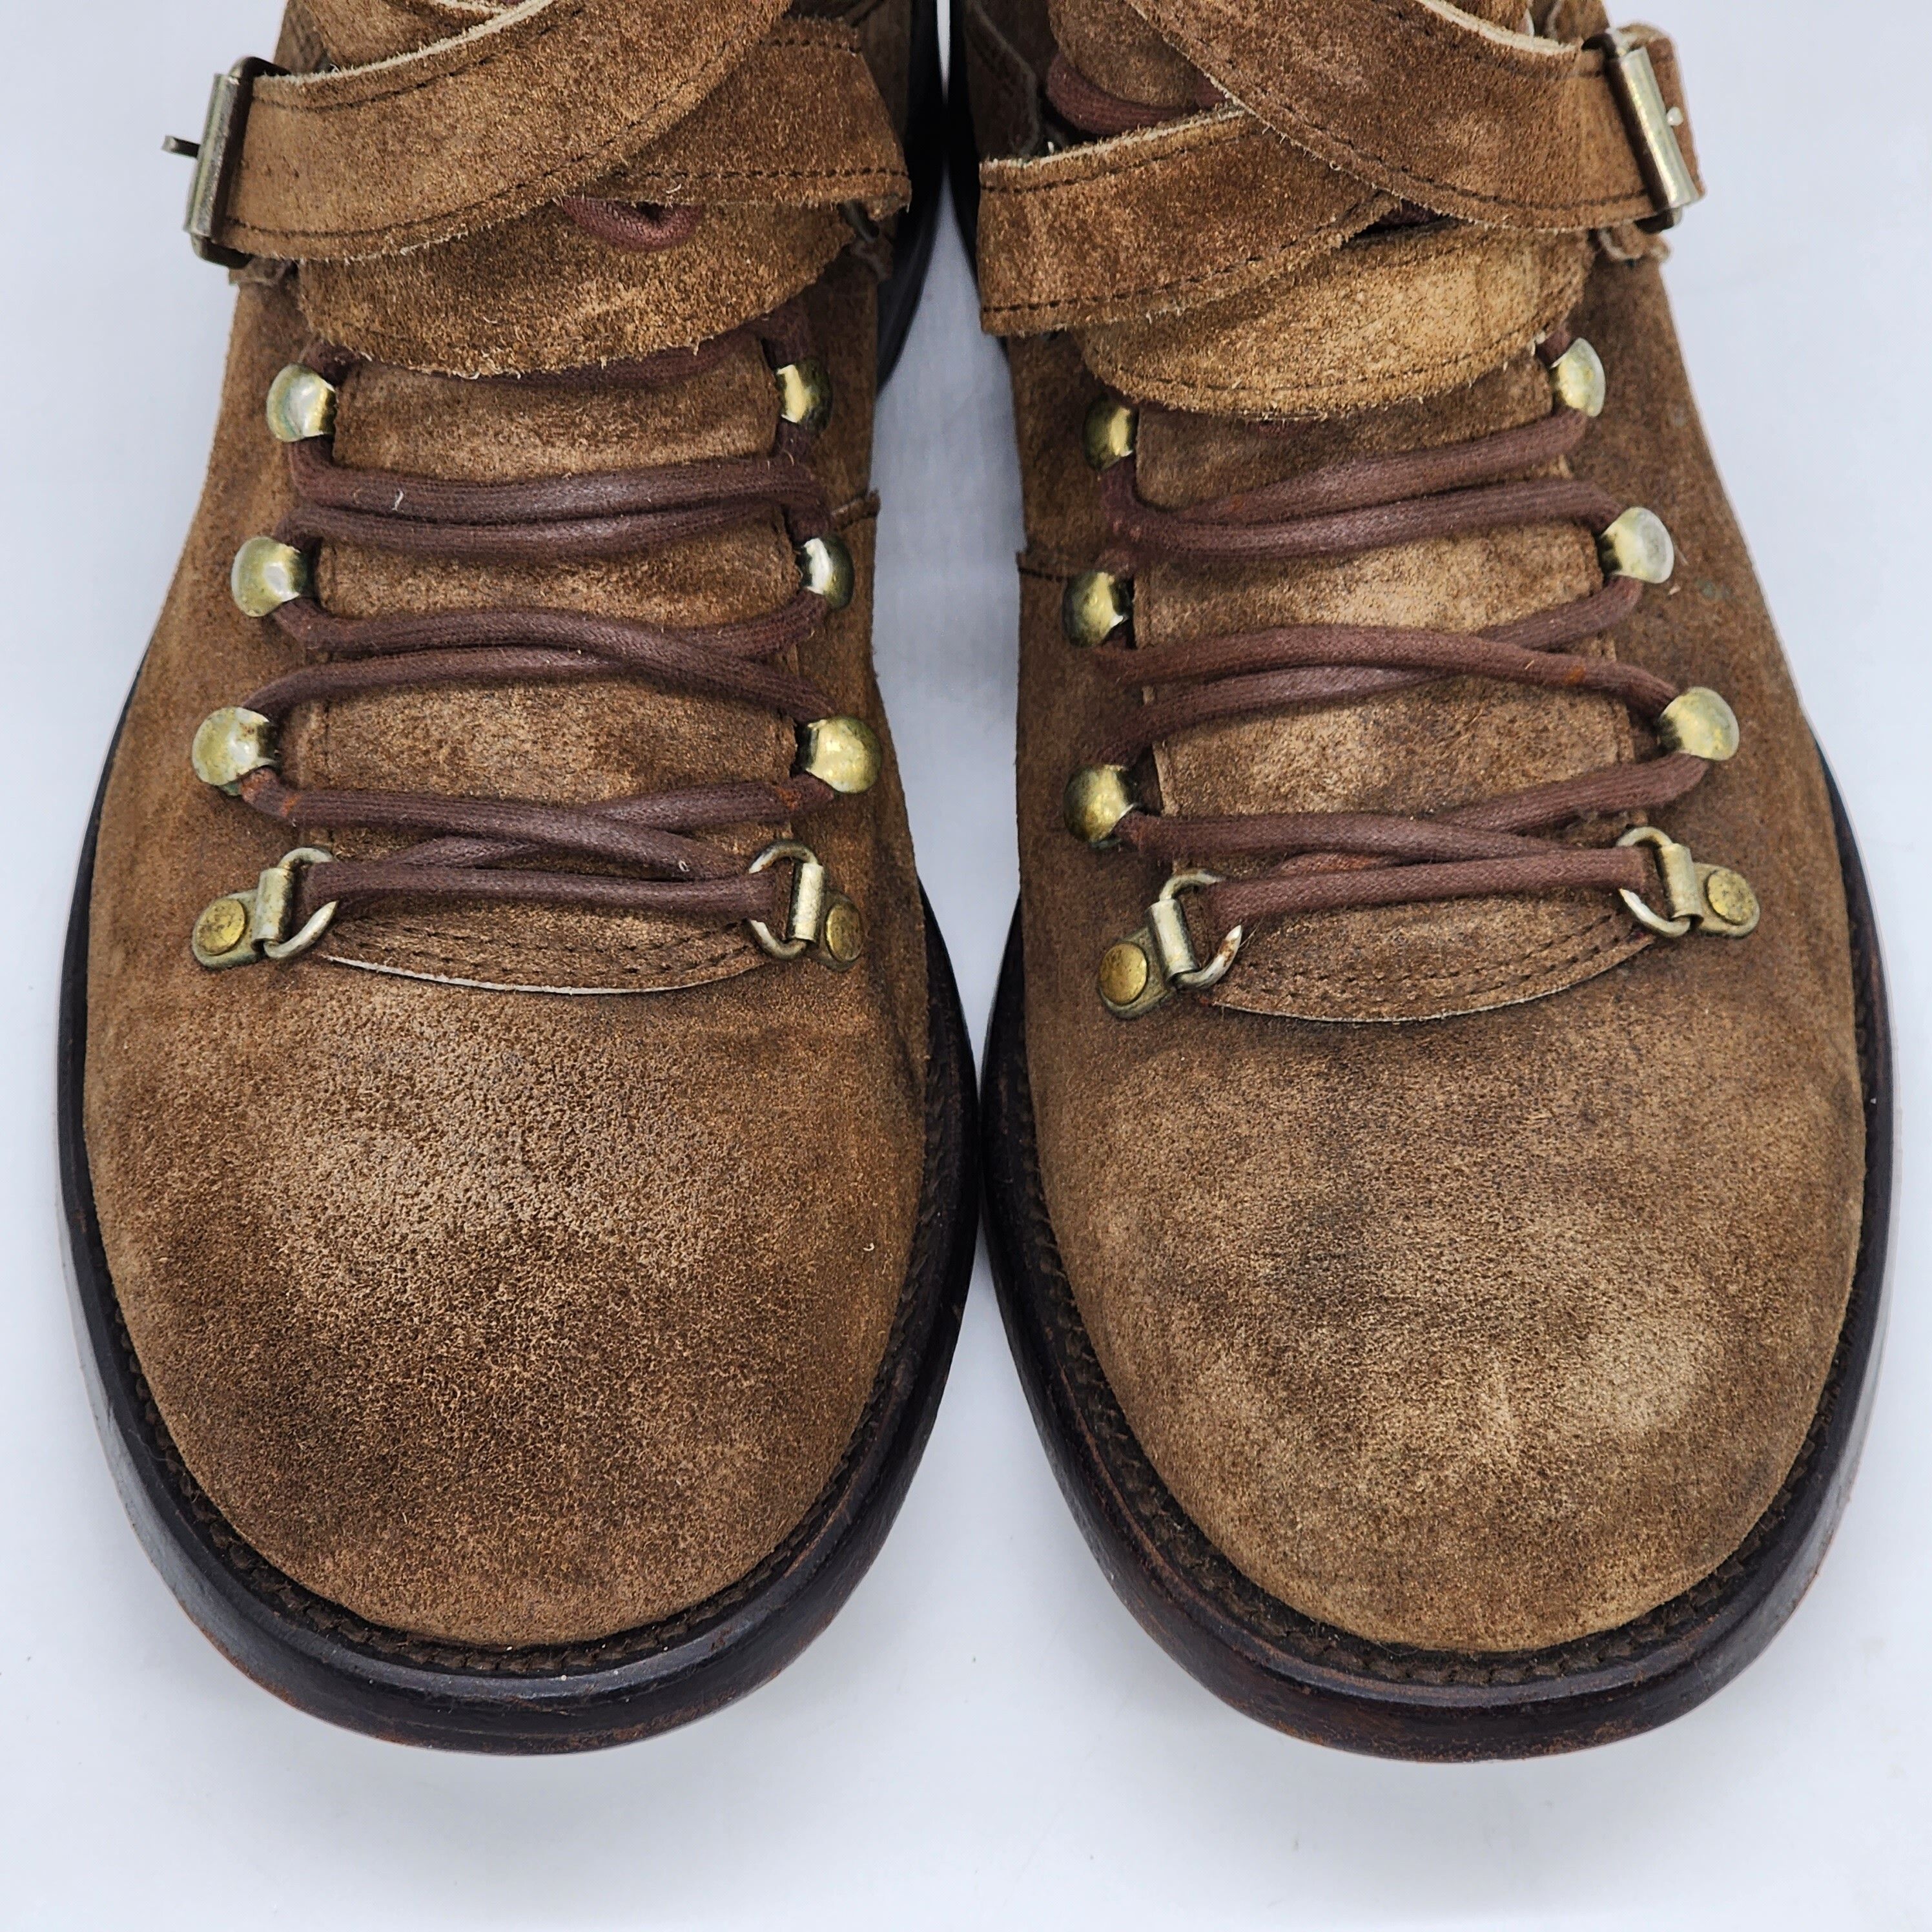 Archival Clothing - Jean Baptiste Rautureau - Archival Strap Hiking Boot - 4